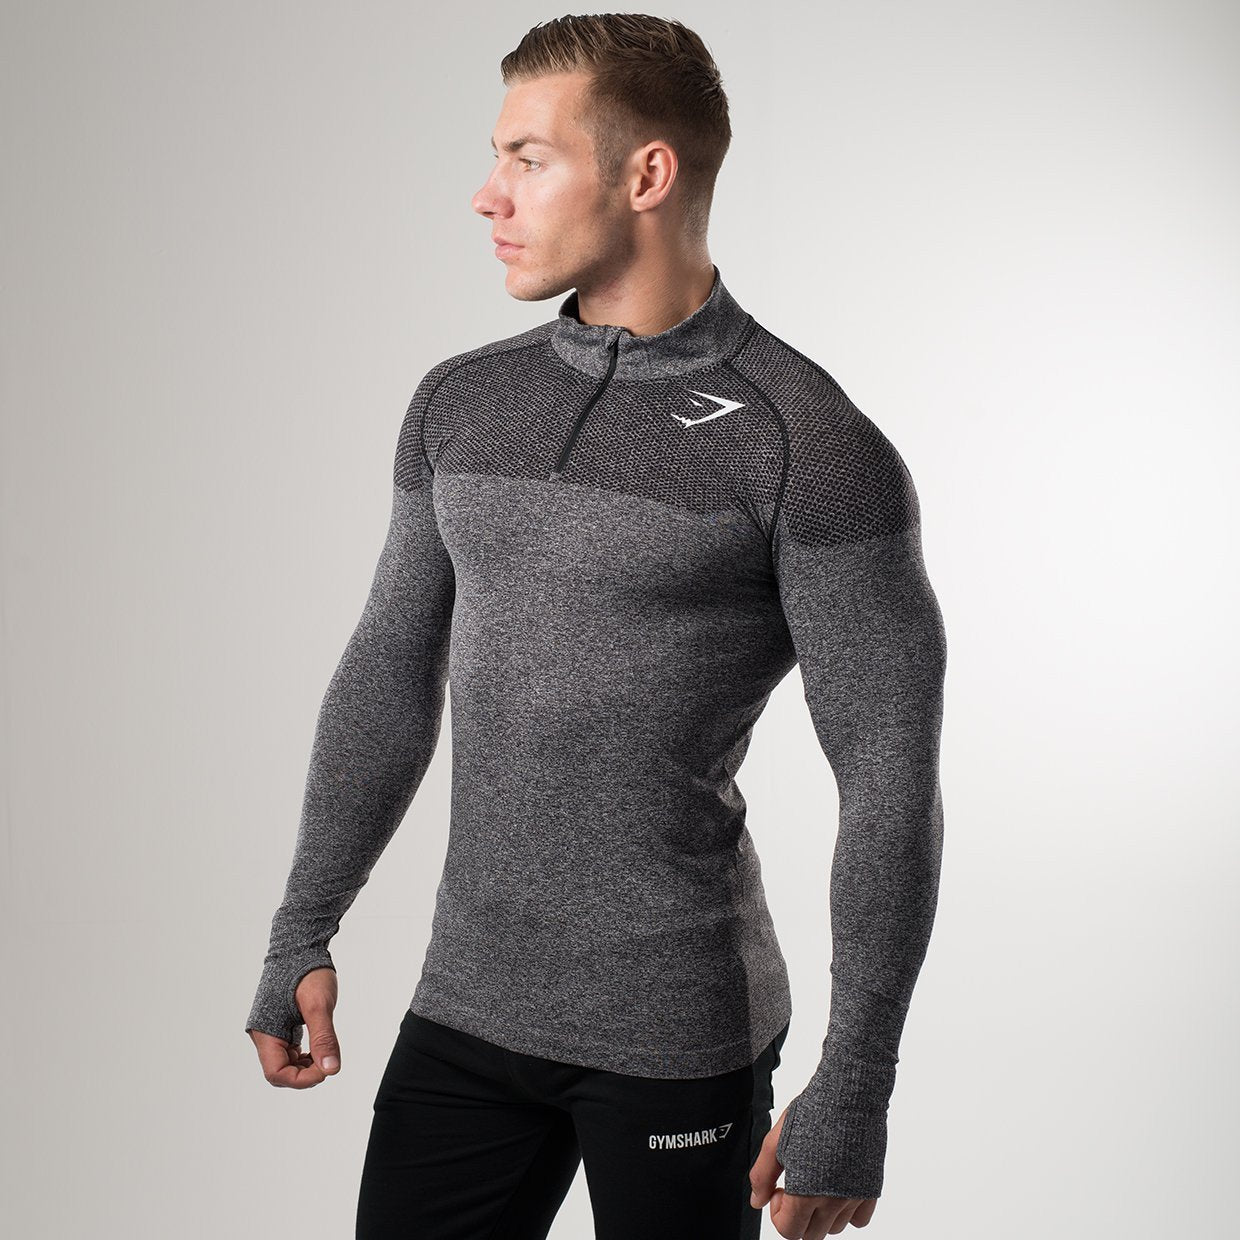 Phantom Seamless 1/4 Zip Pullover in Charcoal - view 4